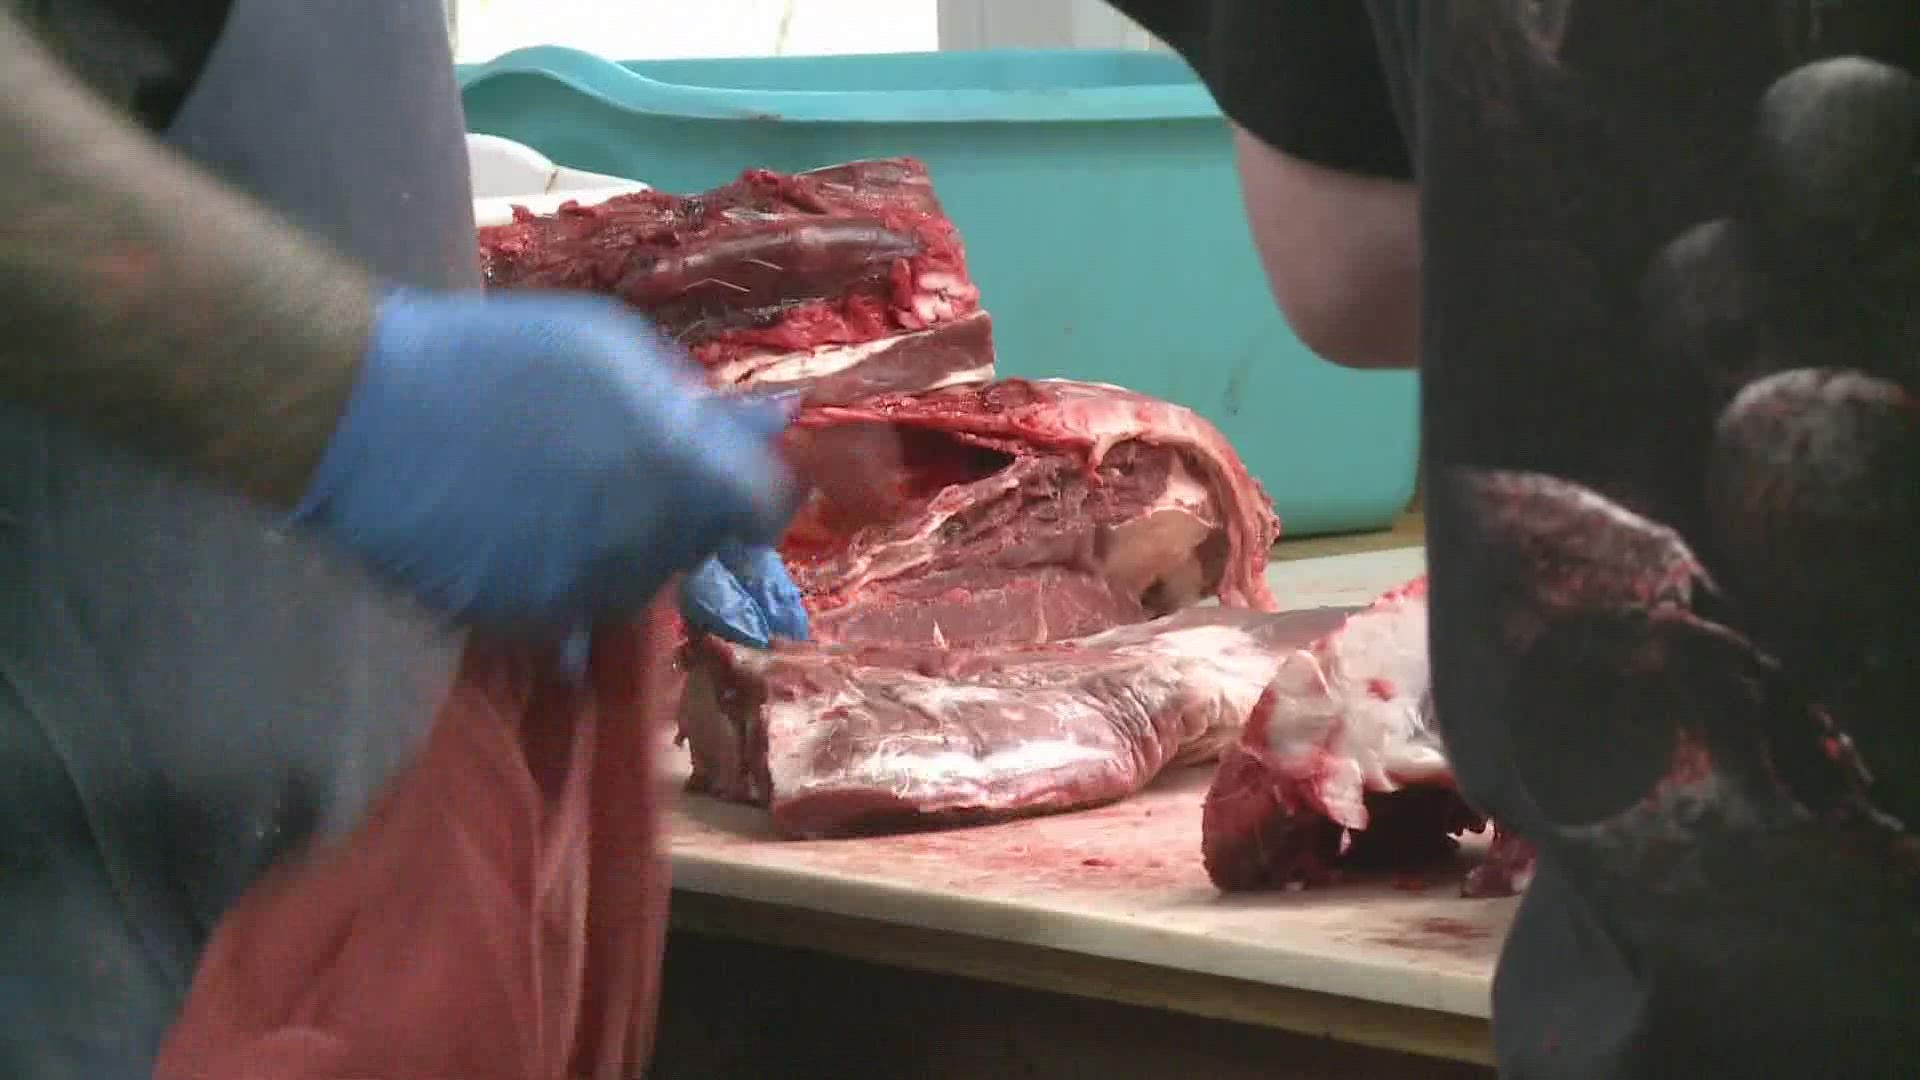 Barb's Deer Processing has been in Comstock Park, for the last 60 years. Owners say they are preparing to process more deer this year compared to last.